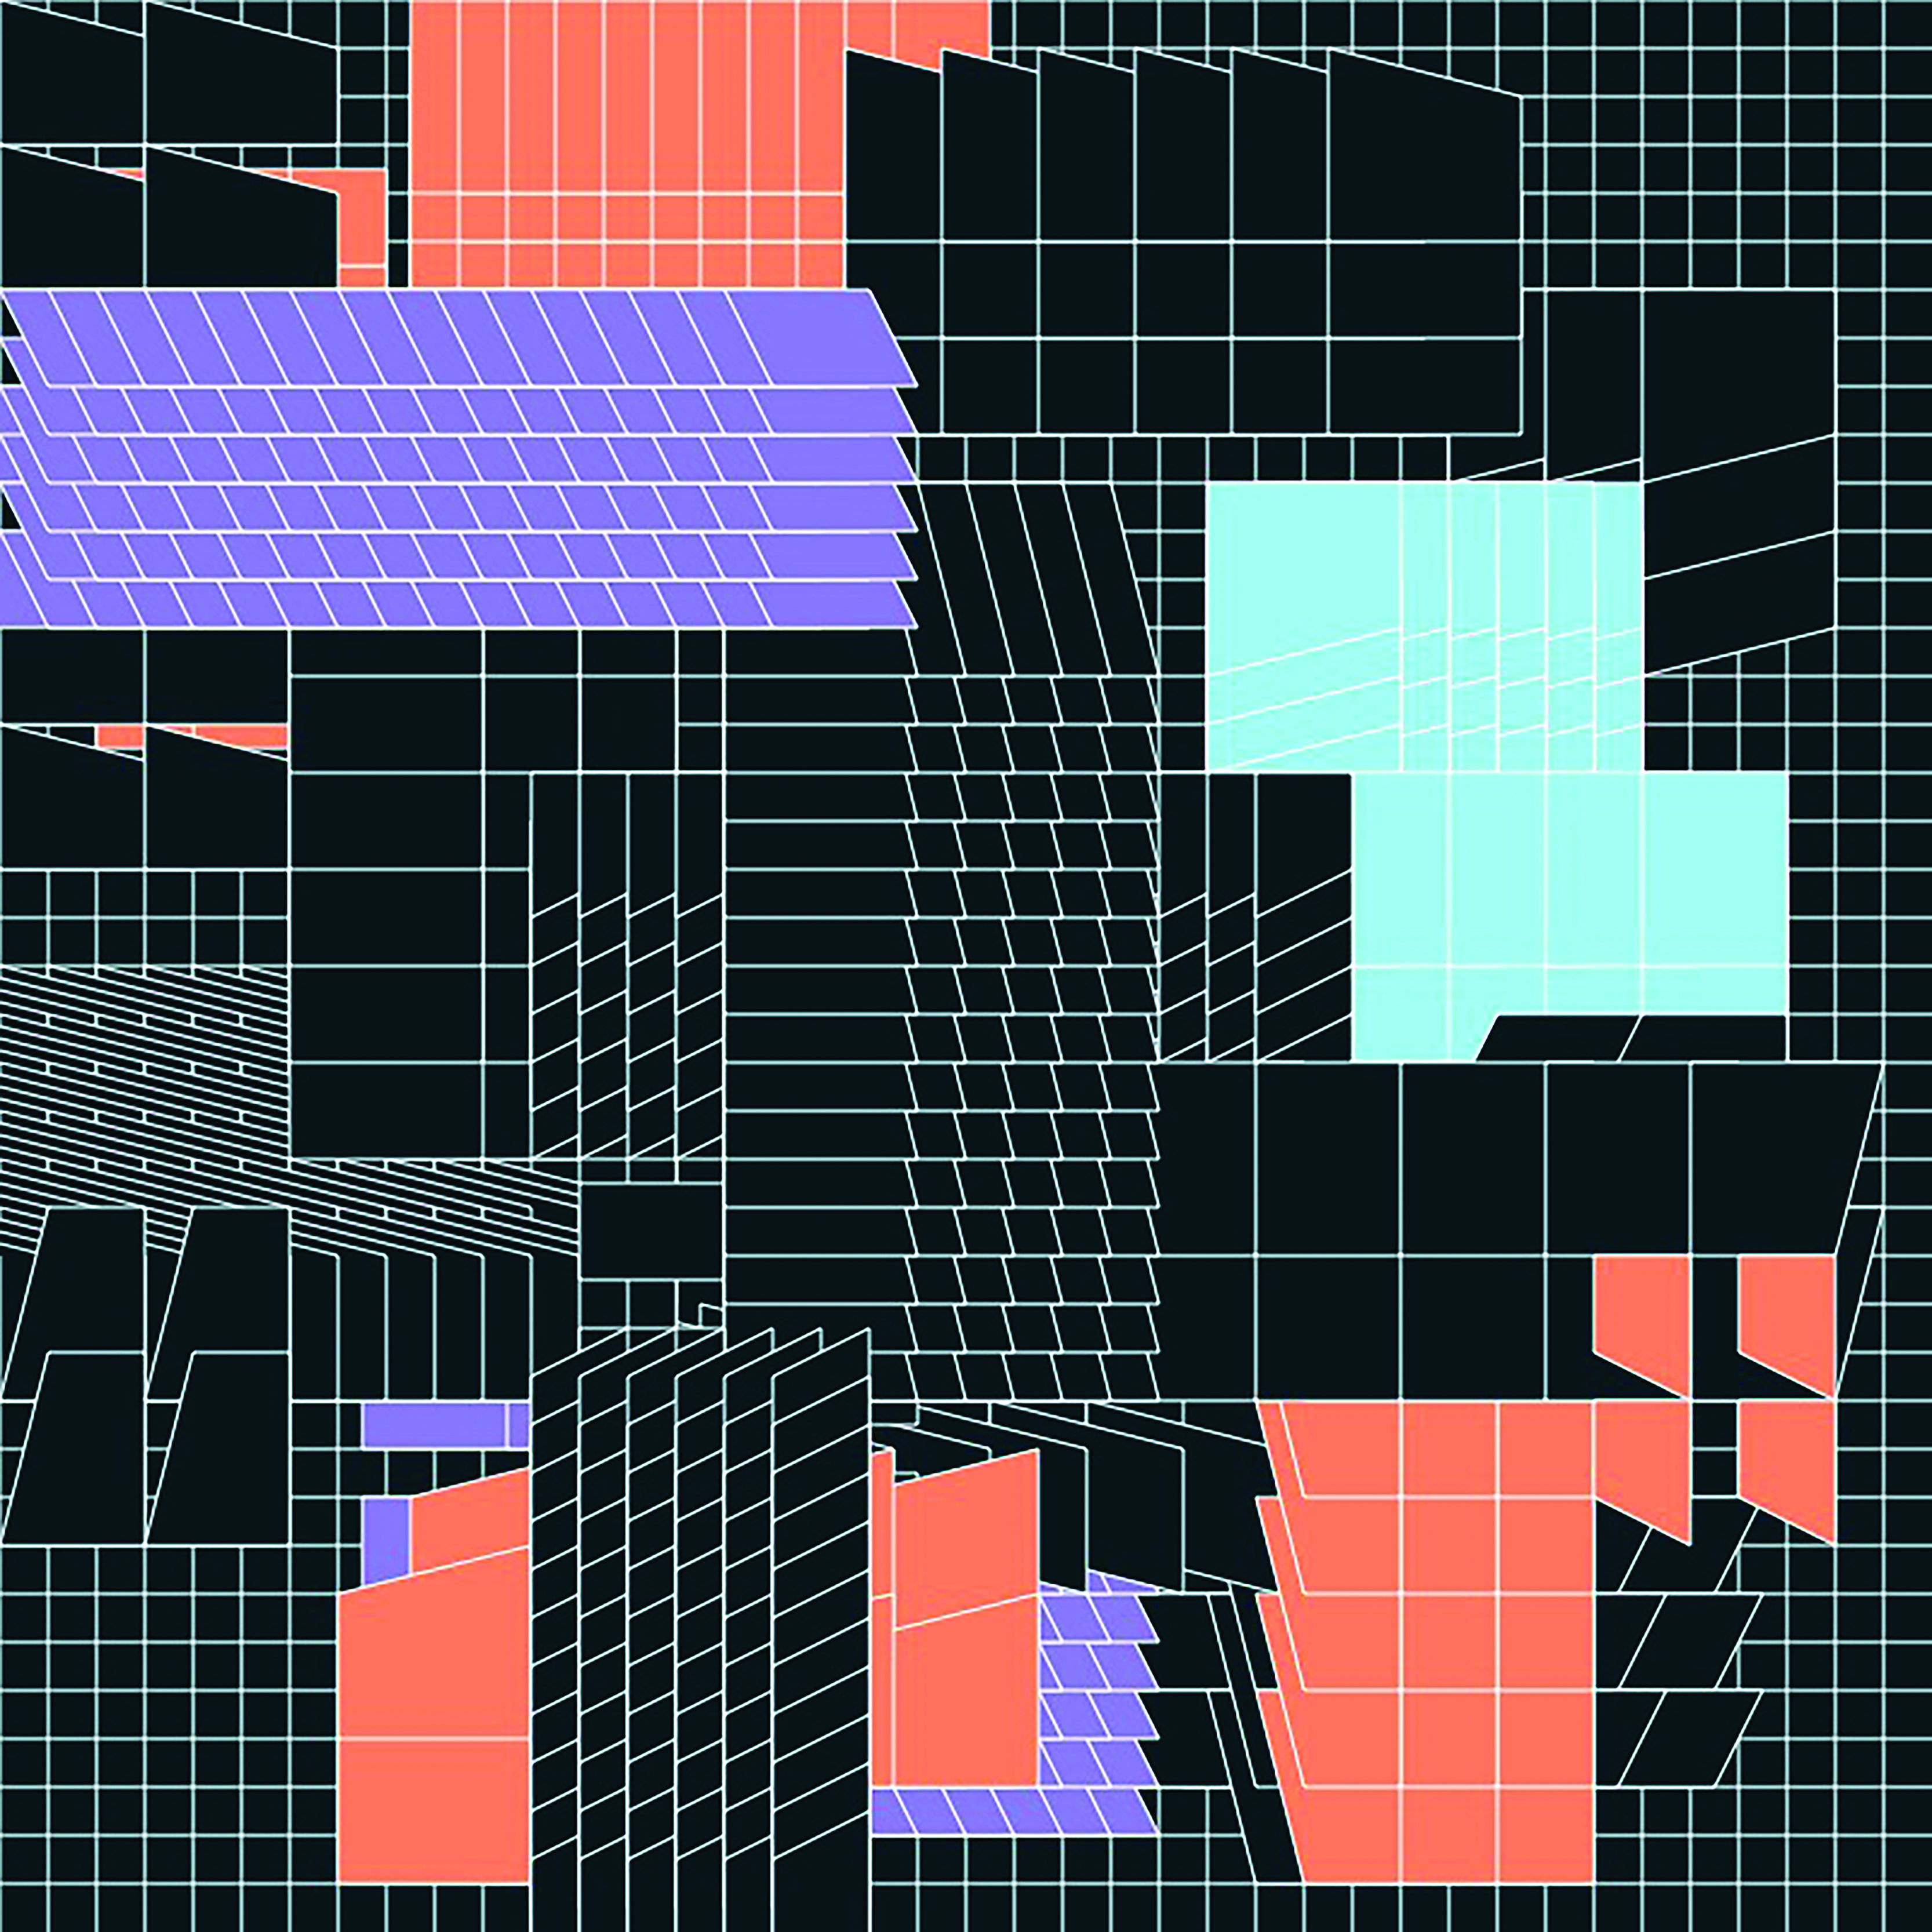 A square-shaped generative art piece composed of many smaller squares and polygons, mostly colored dark grey but with patches of purple, peach, and light blue.